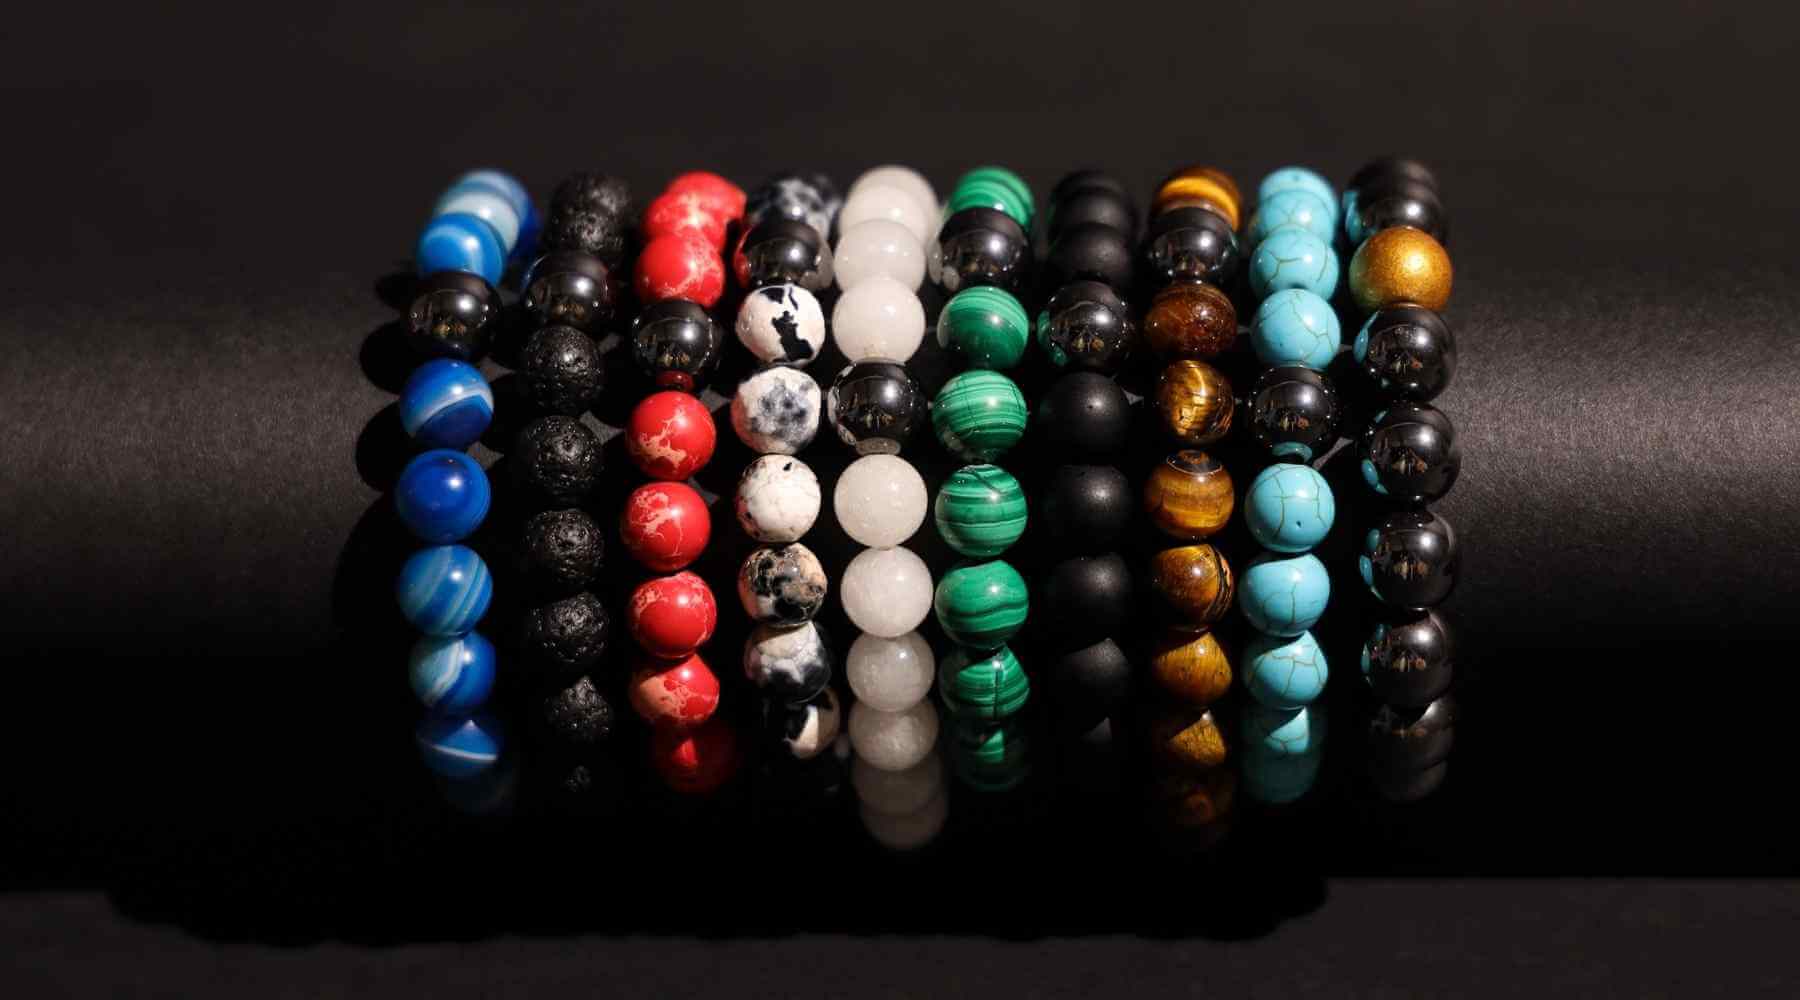 Mens Jewelry | Bracelets For Men  | BuDhaHomme by BuDhaGirl